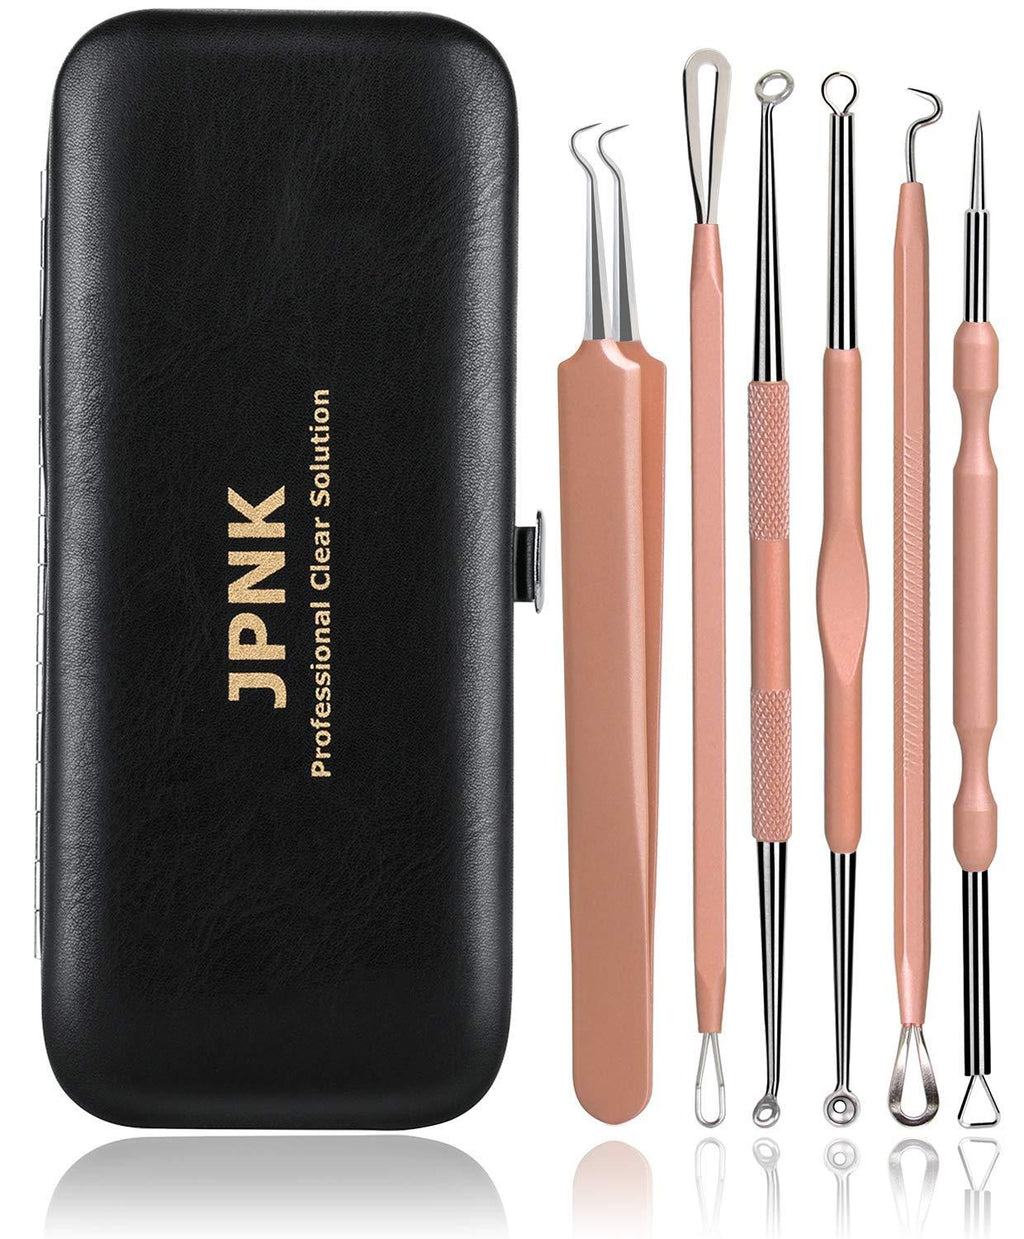 [Australia] - JPNK NEW Pink Blackhead Remover Tools Comedone Extractor Acne Removal Kit for Blemish, Whitehead Popping, Zit Removing for Nose Face with Leather Bag 